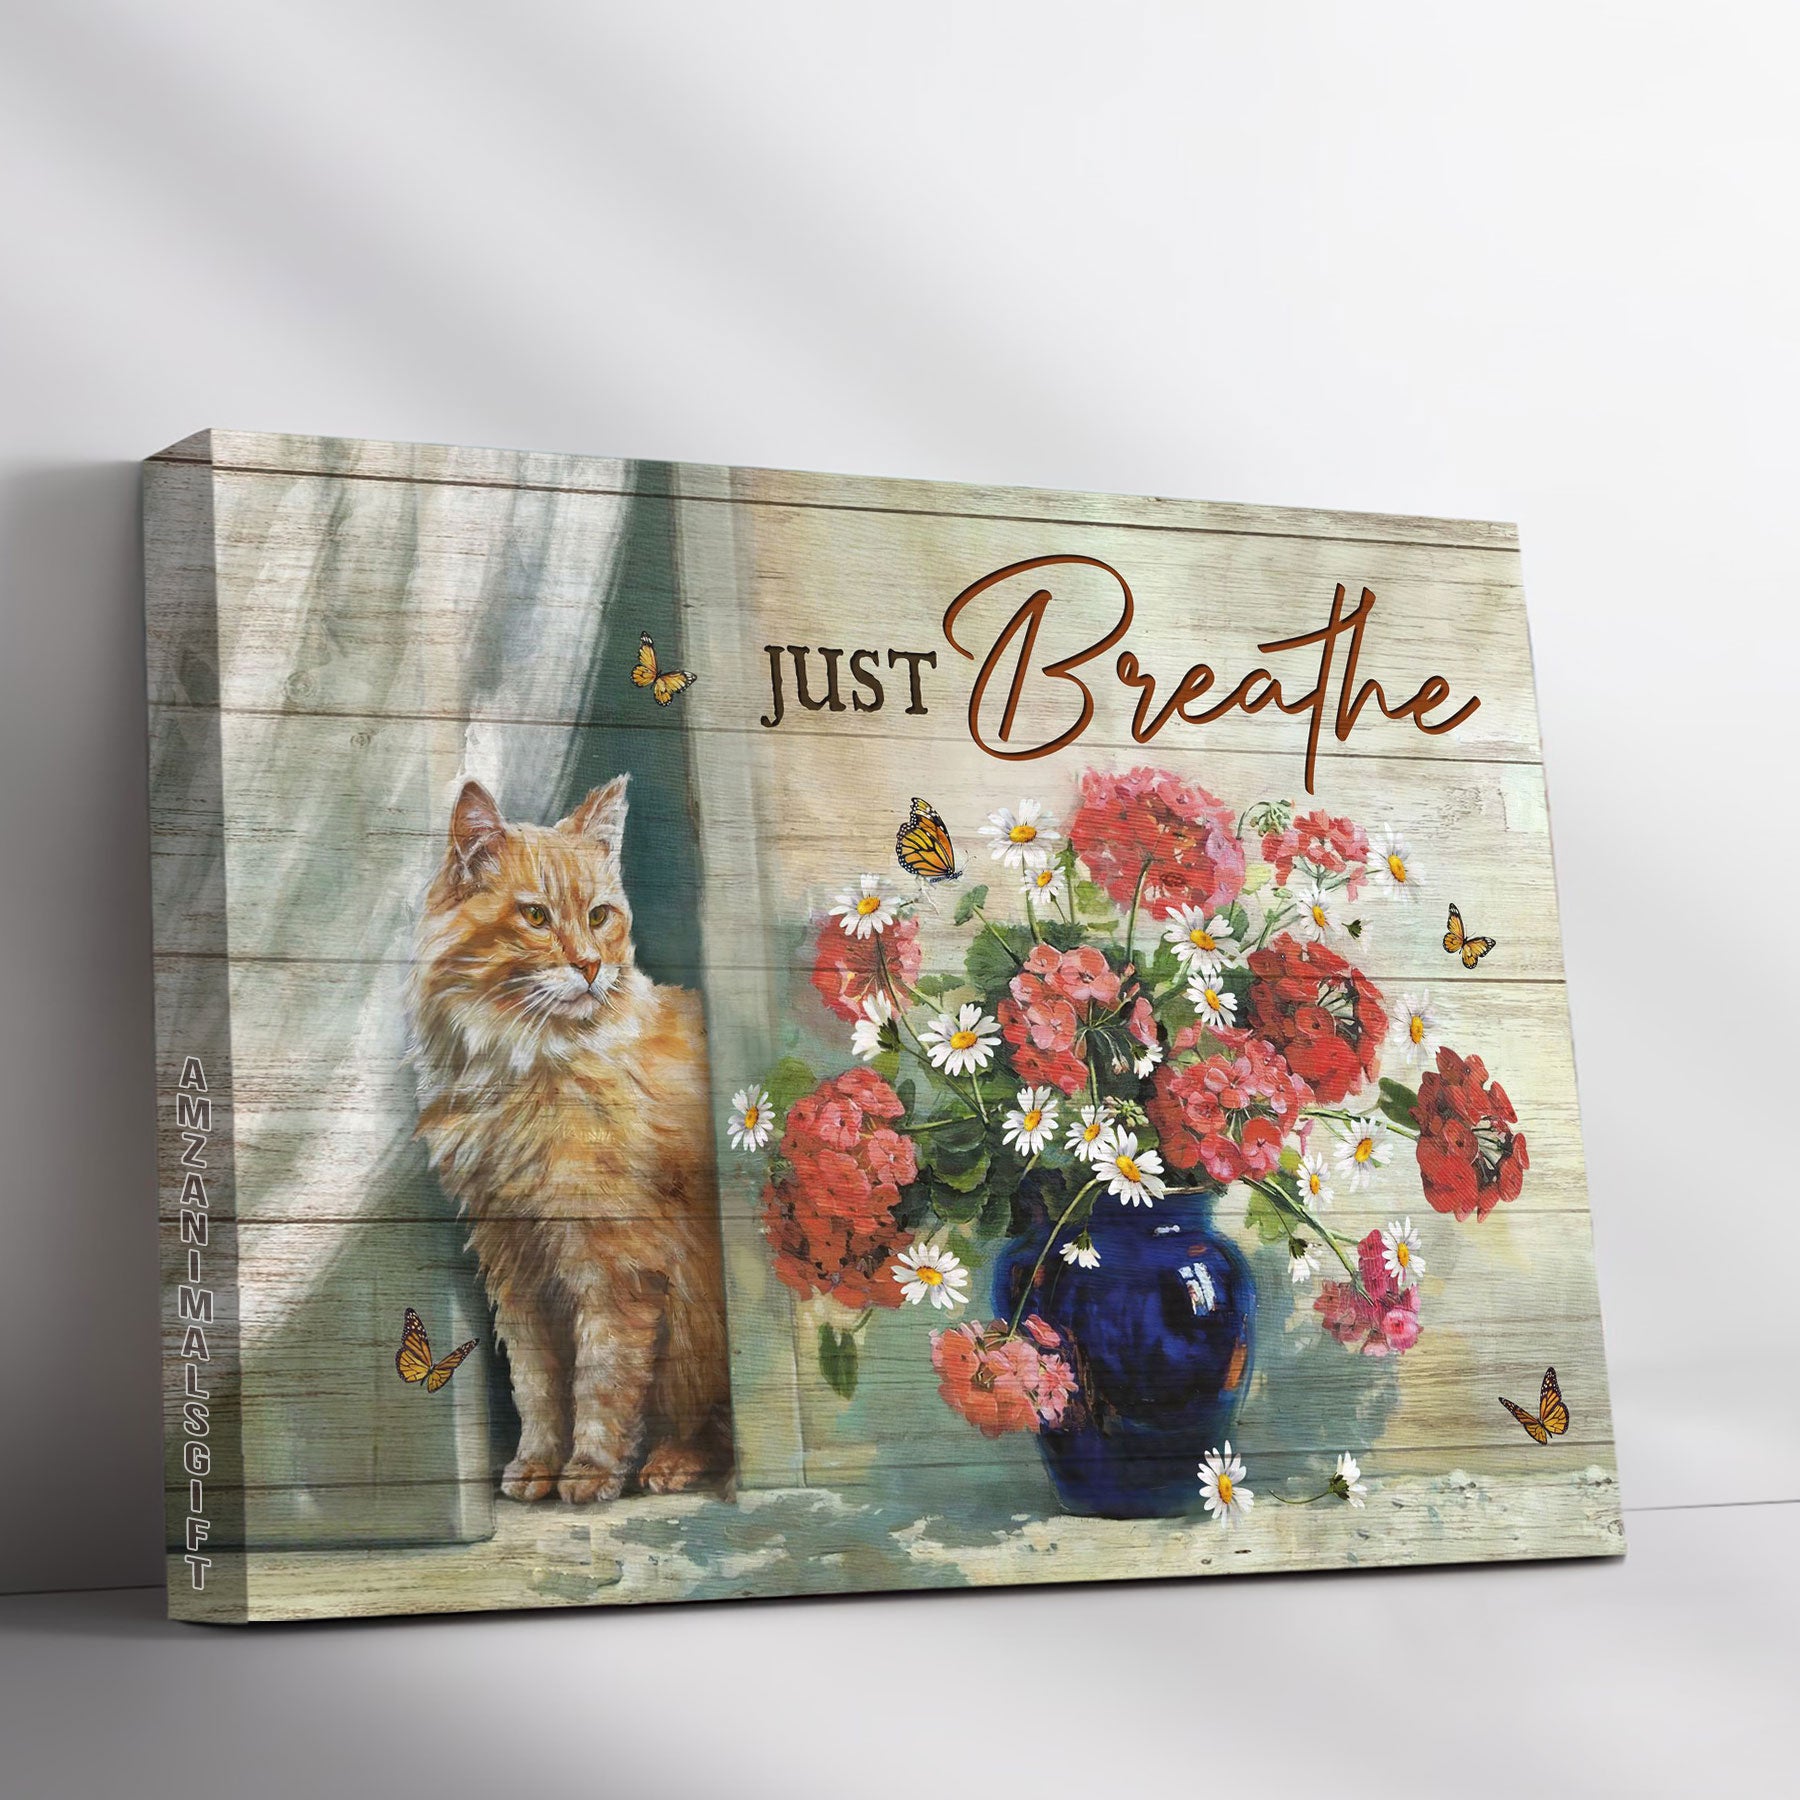 Cat & Jesus Premium Wrapped Landscape Canvas - Stunning flower painting, Monarch butterfly, Adorable Maine Coon, Just breathe - Gift For Christian